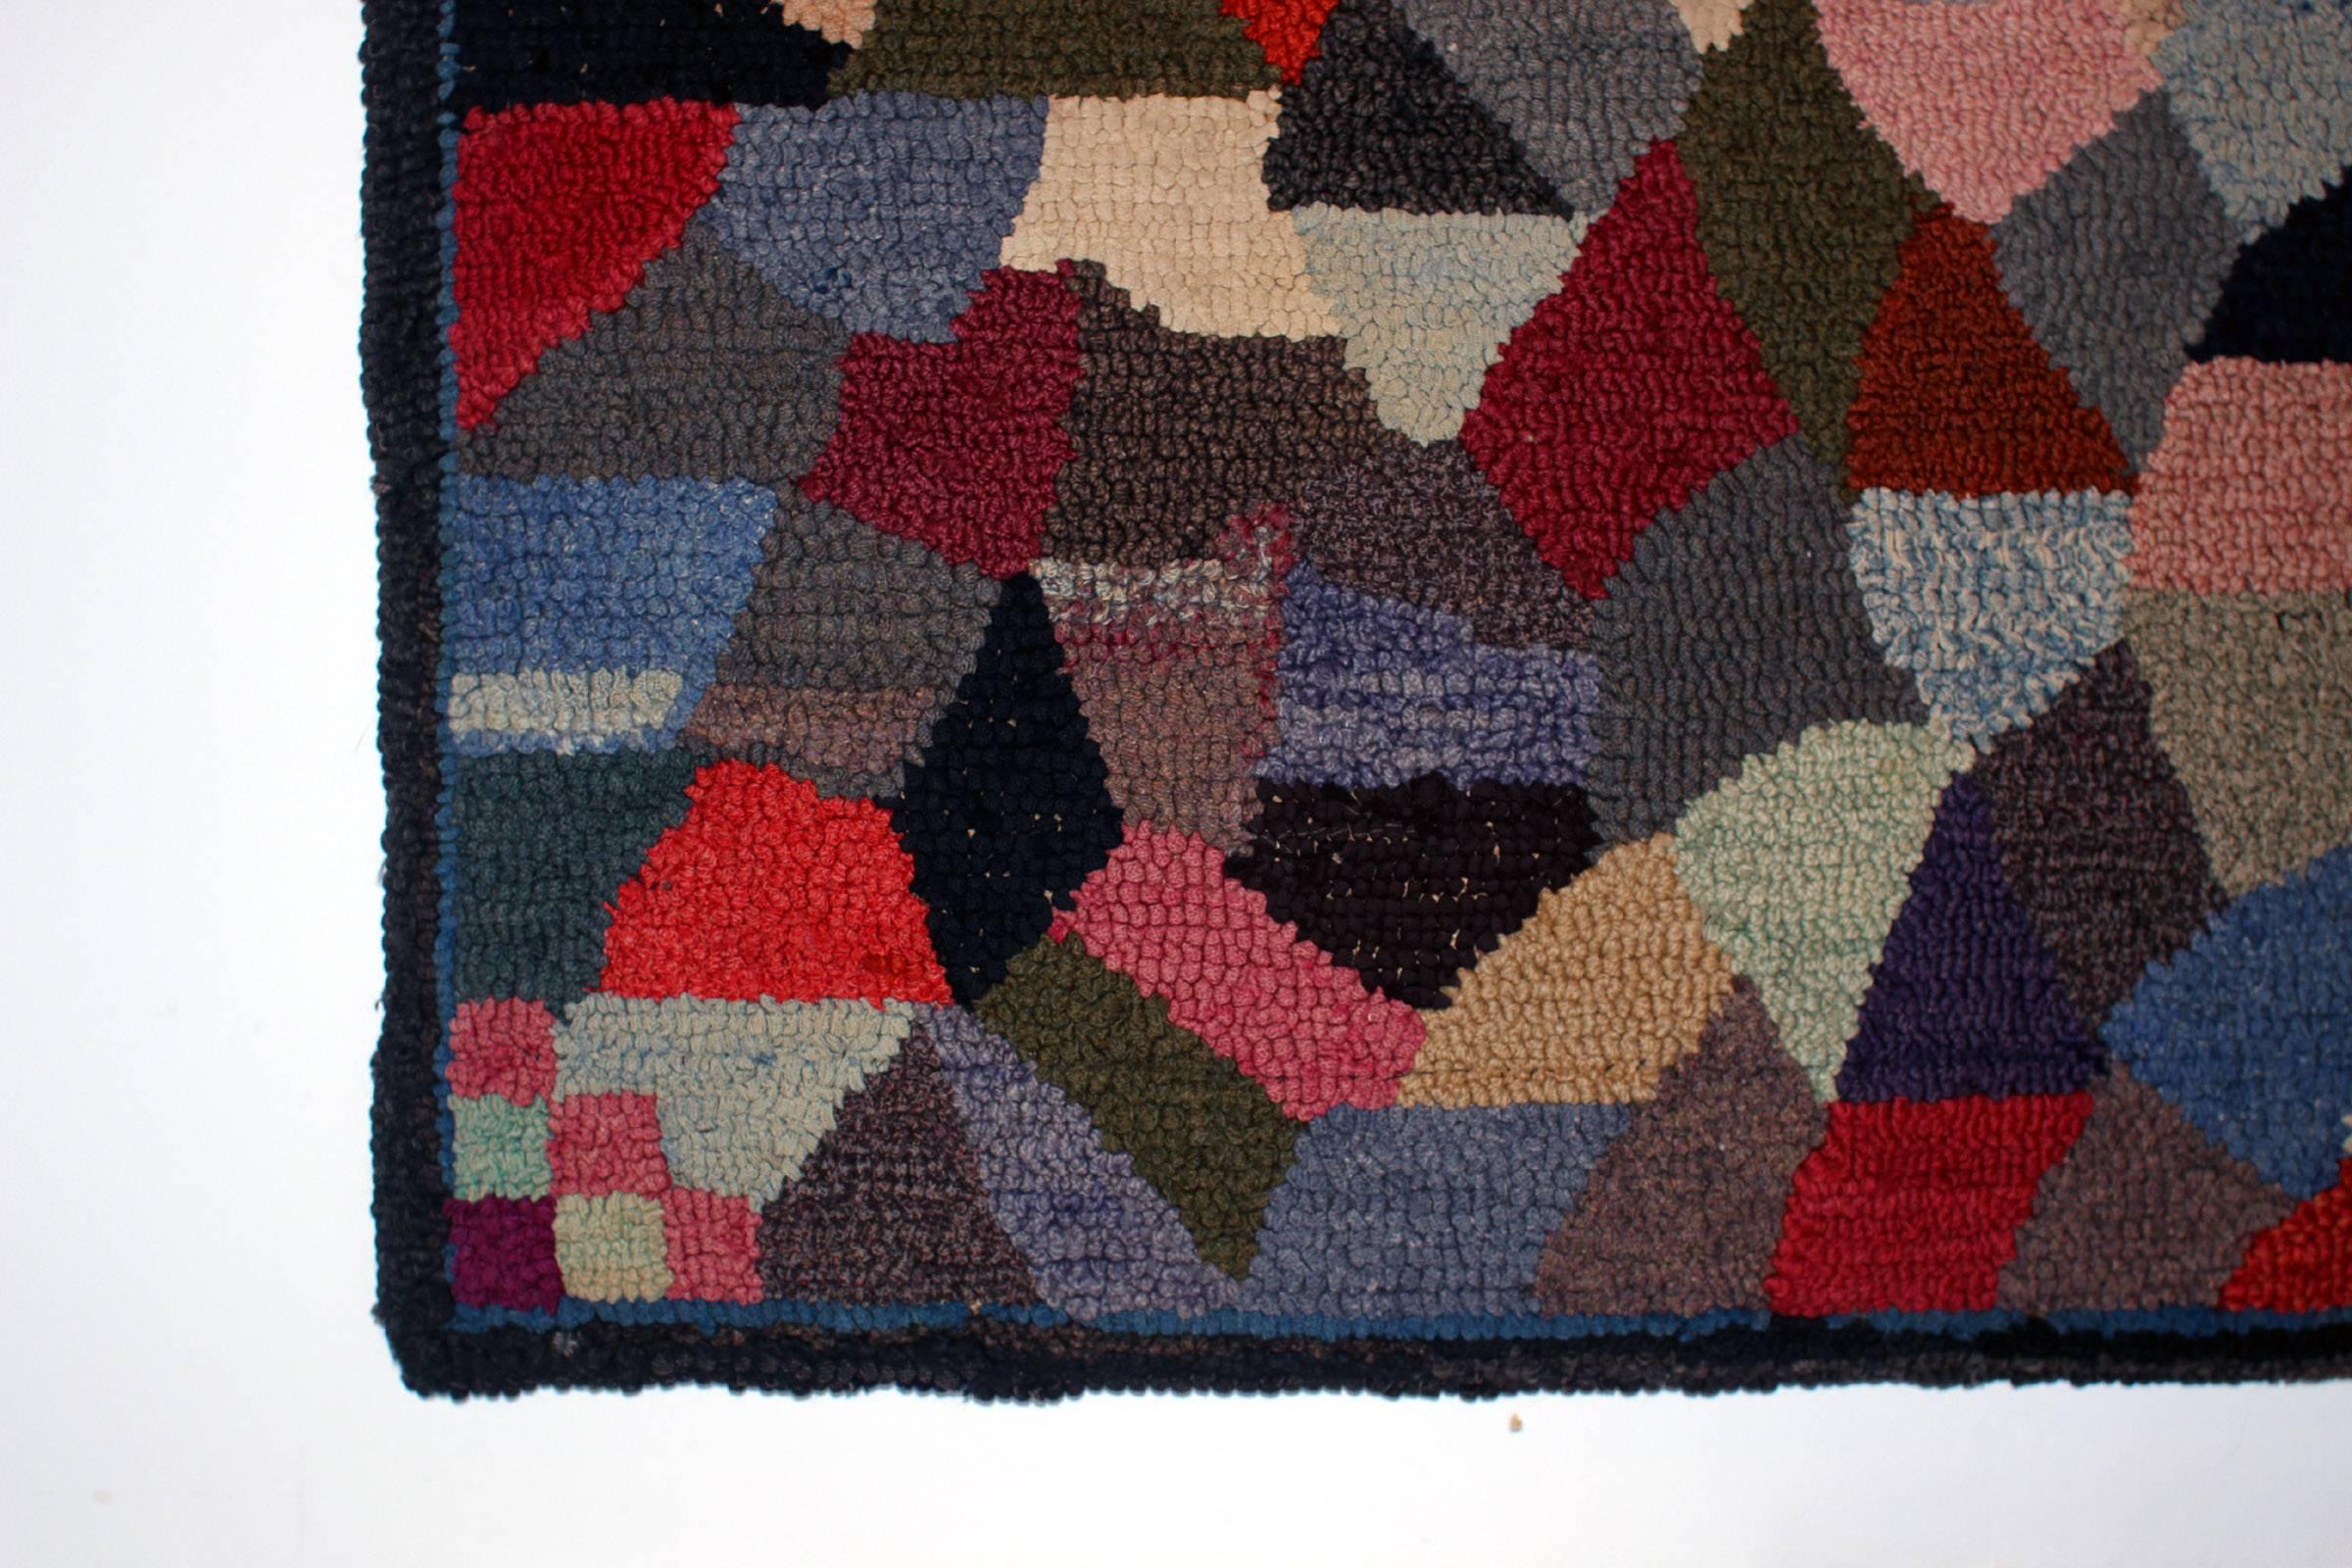 Hooked rug in strong color and appealing abstract design. With narrow border and notable block-patterned corner details; American, early 20th century. Handmade and in excellent condition. Could be used on the floor or hanging on a wall.